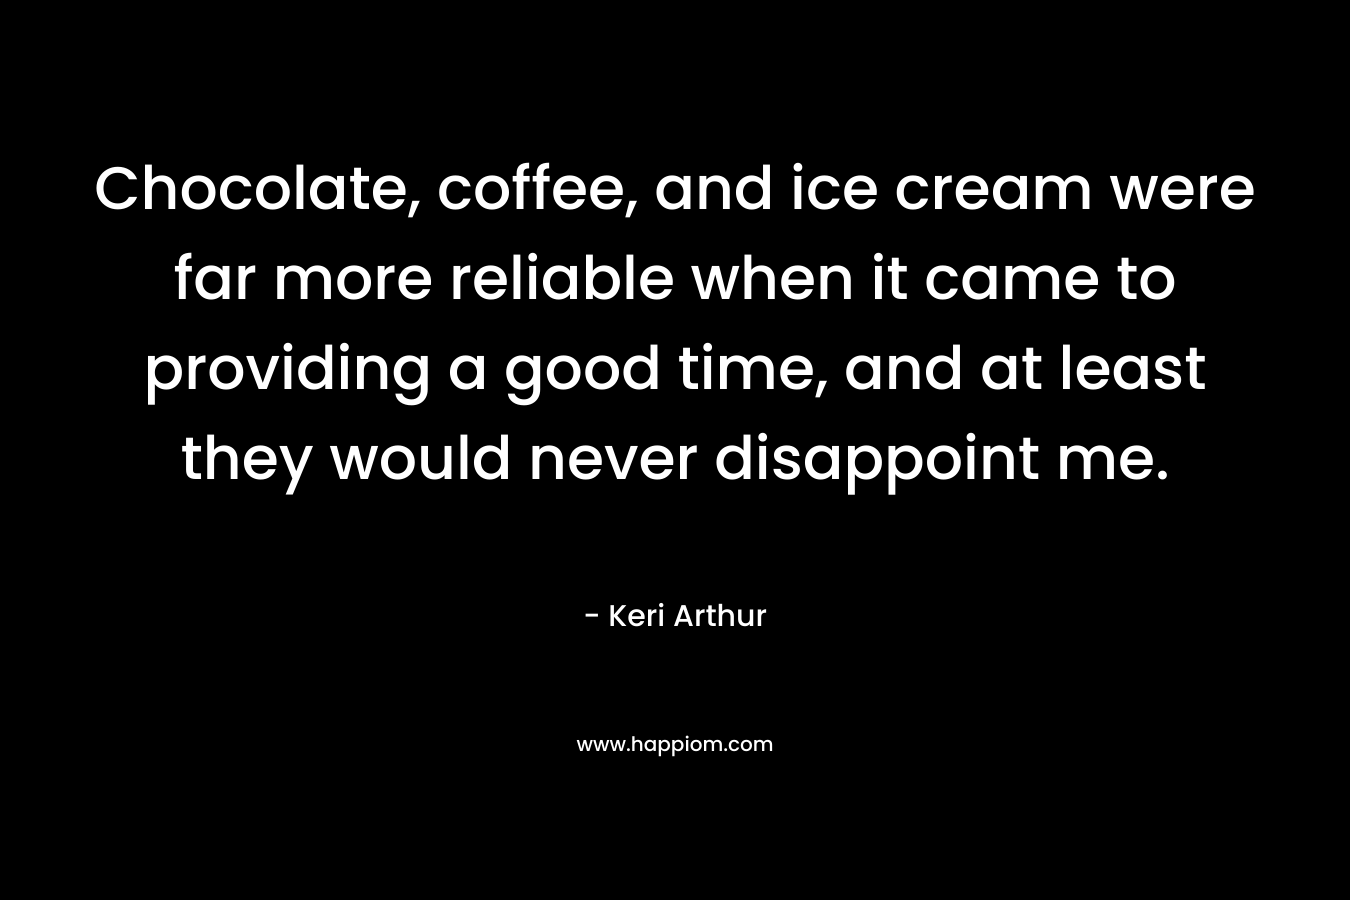 Chocolate, coffee, and ice cream were far more reliable when it came to providing a good time, and at least they would never disappoint me. – Keri Arthur